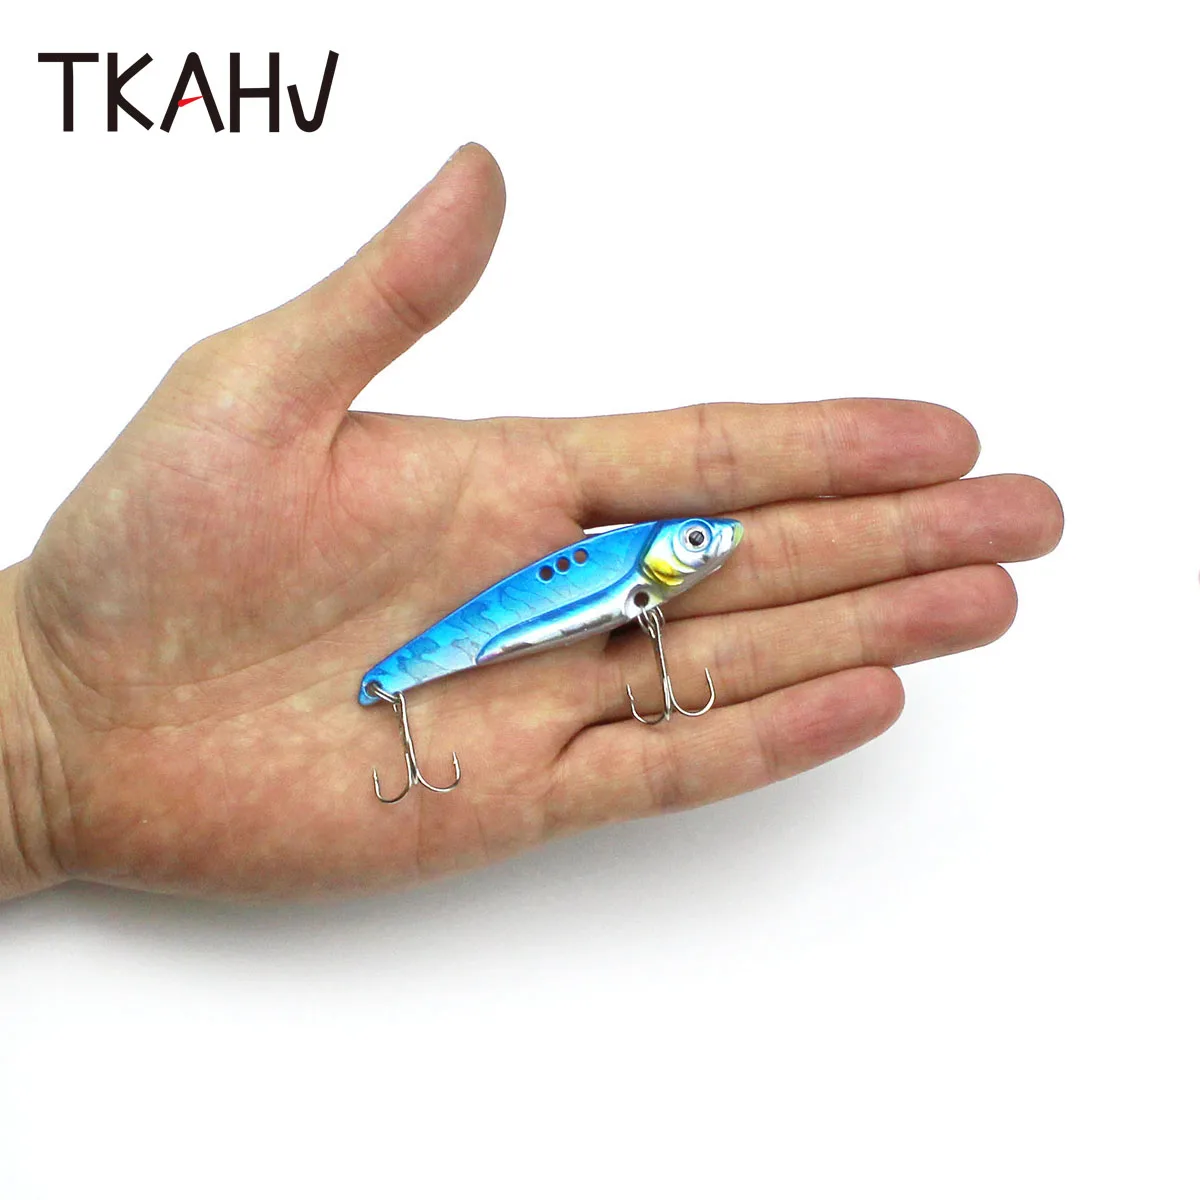 

TKAHV VIB Hard Fishing Lure With Treble Hook Metal Spinner Spoon Bait 3g 5g 7g 10g 12g 14g 18g Trout Bass Jig Artificial Tackle